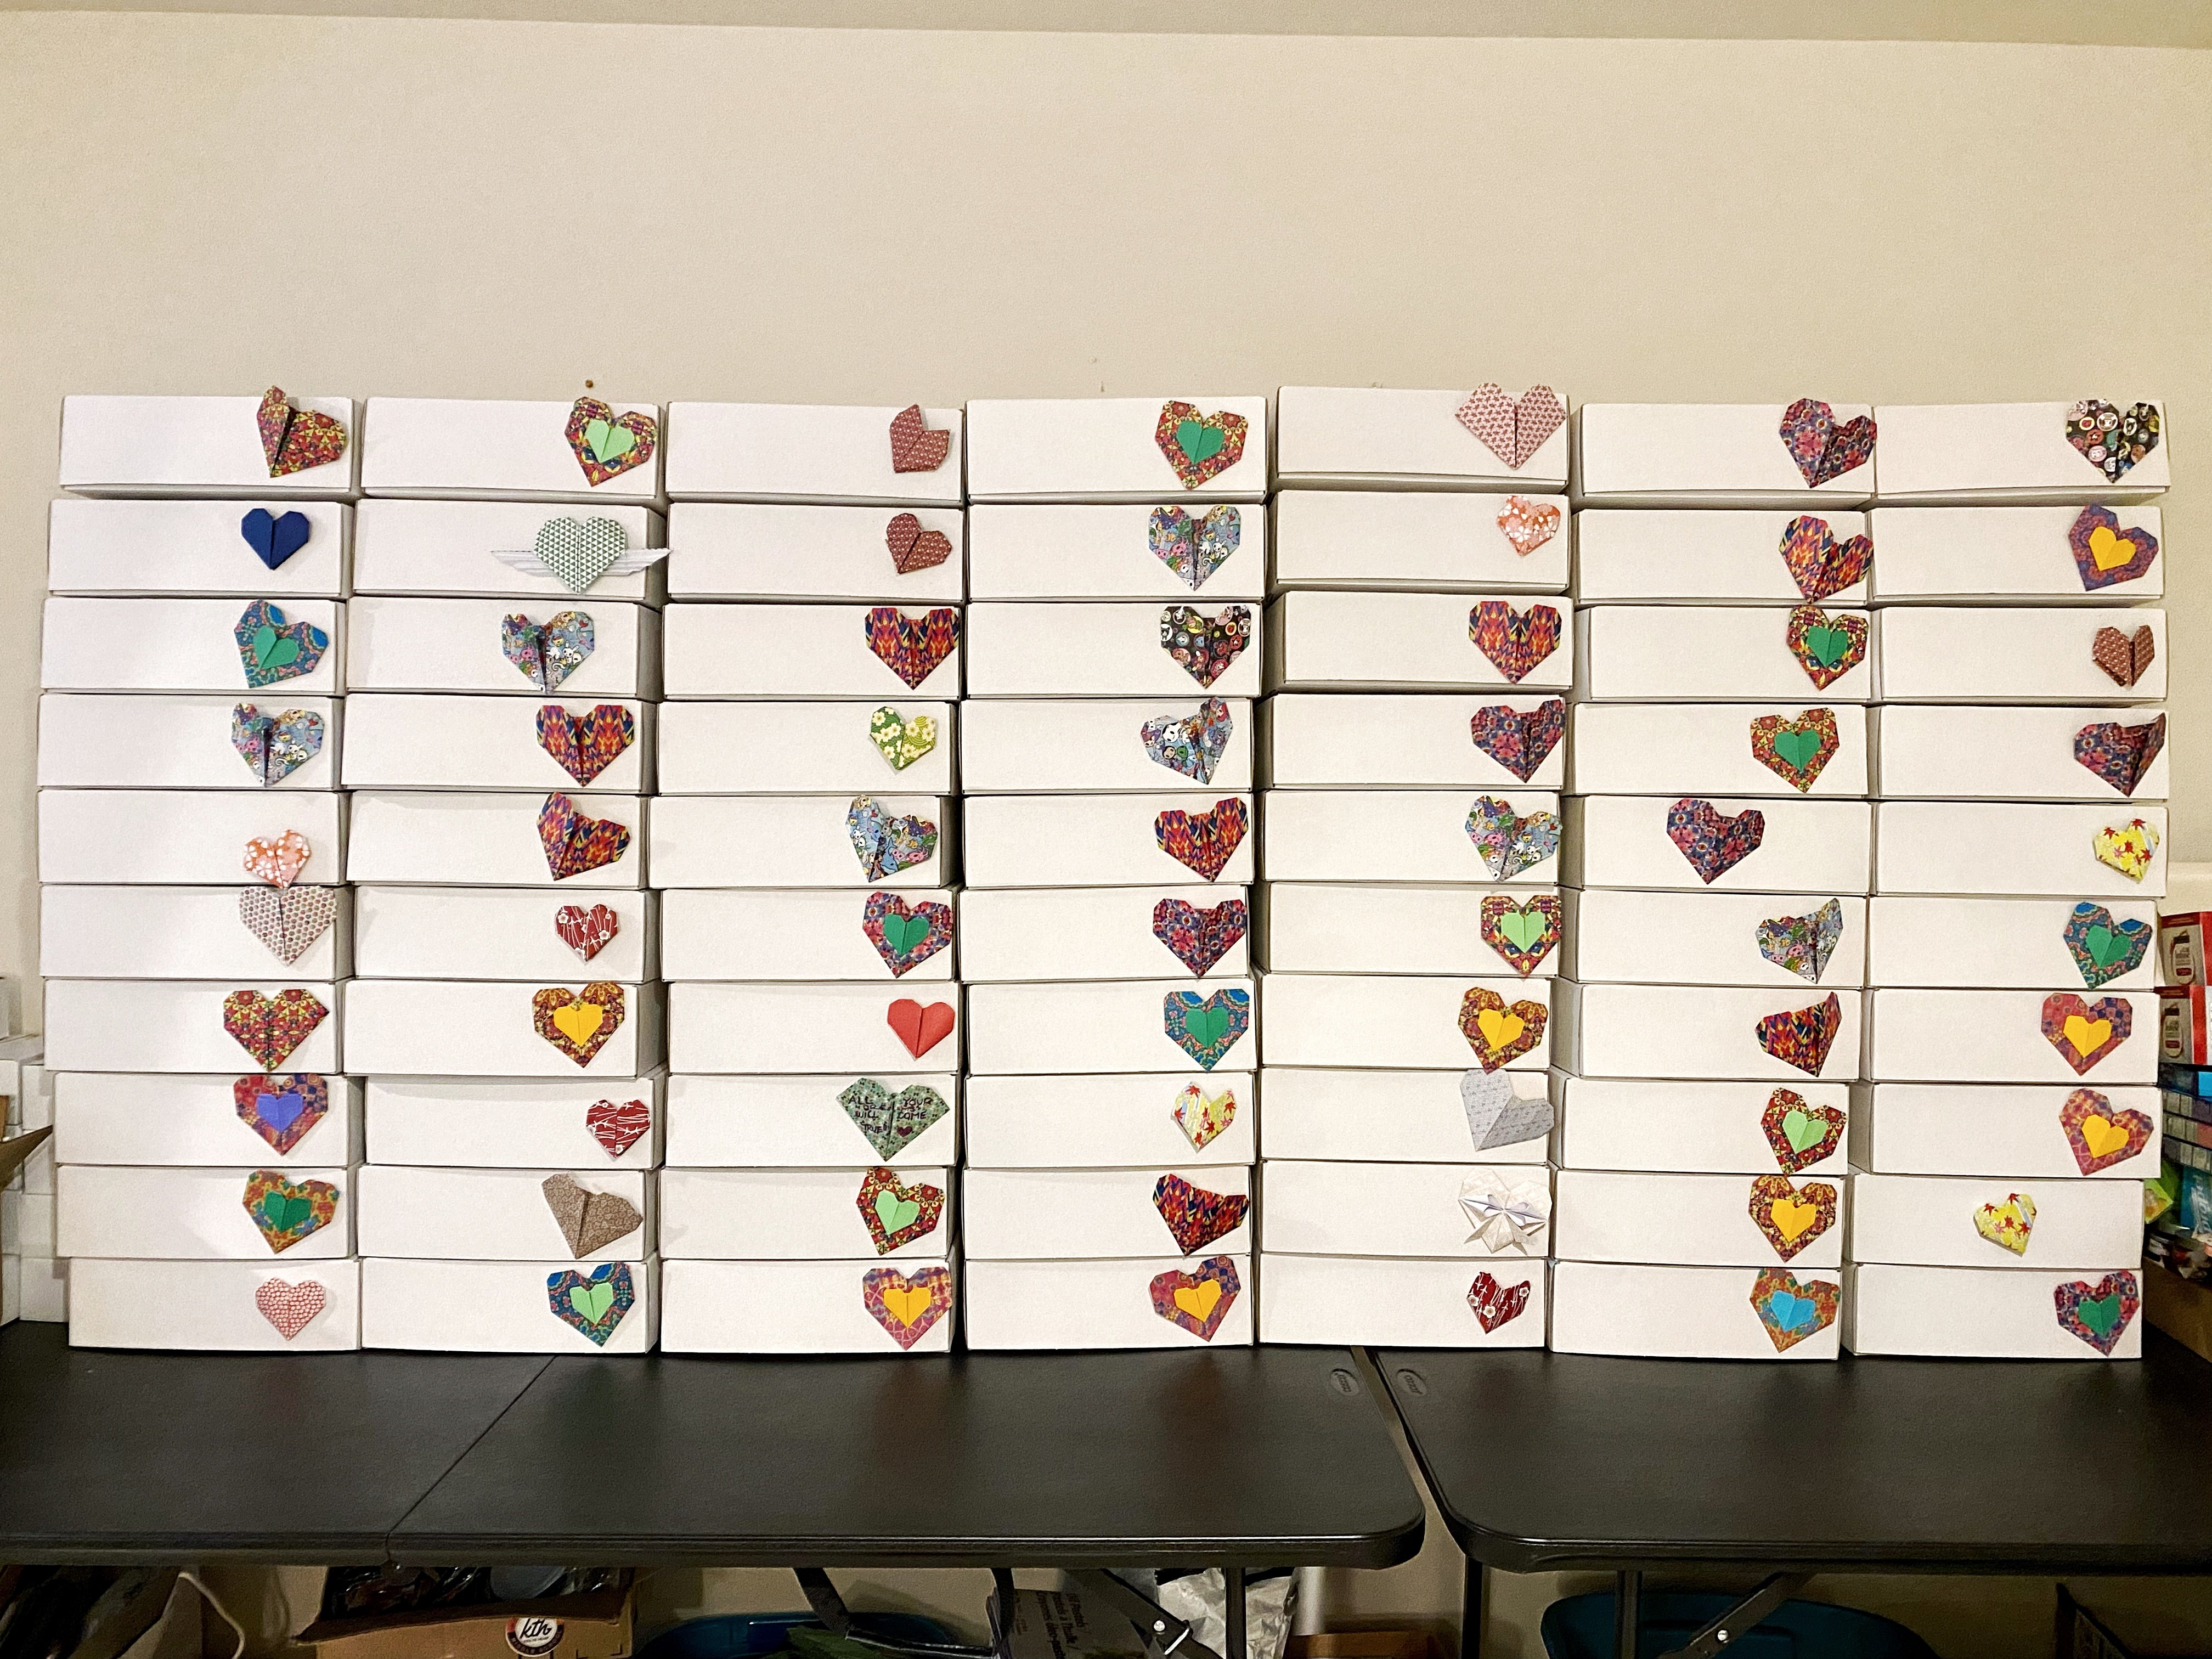 Kits to Heart assembled 70 kits on New Year's Eve 2022!